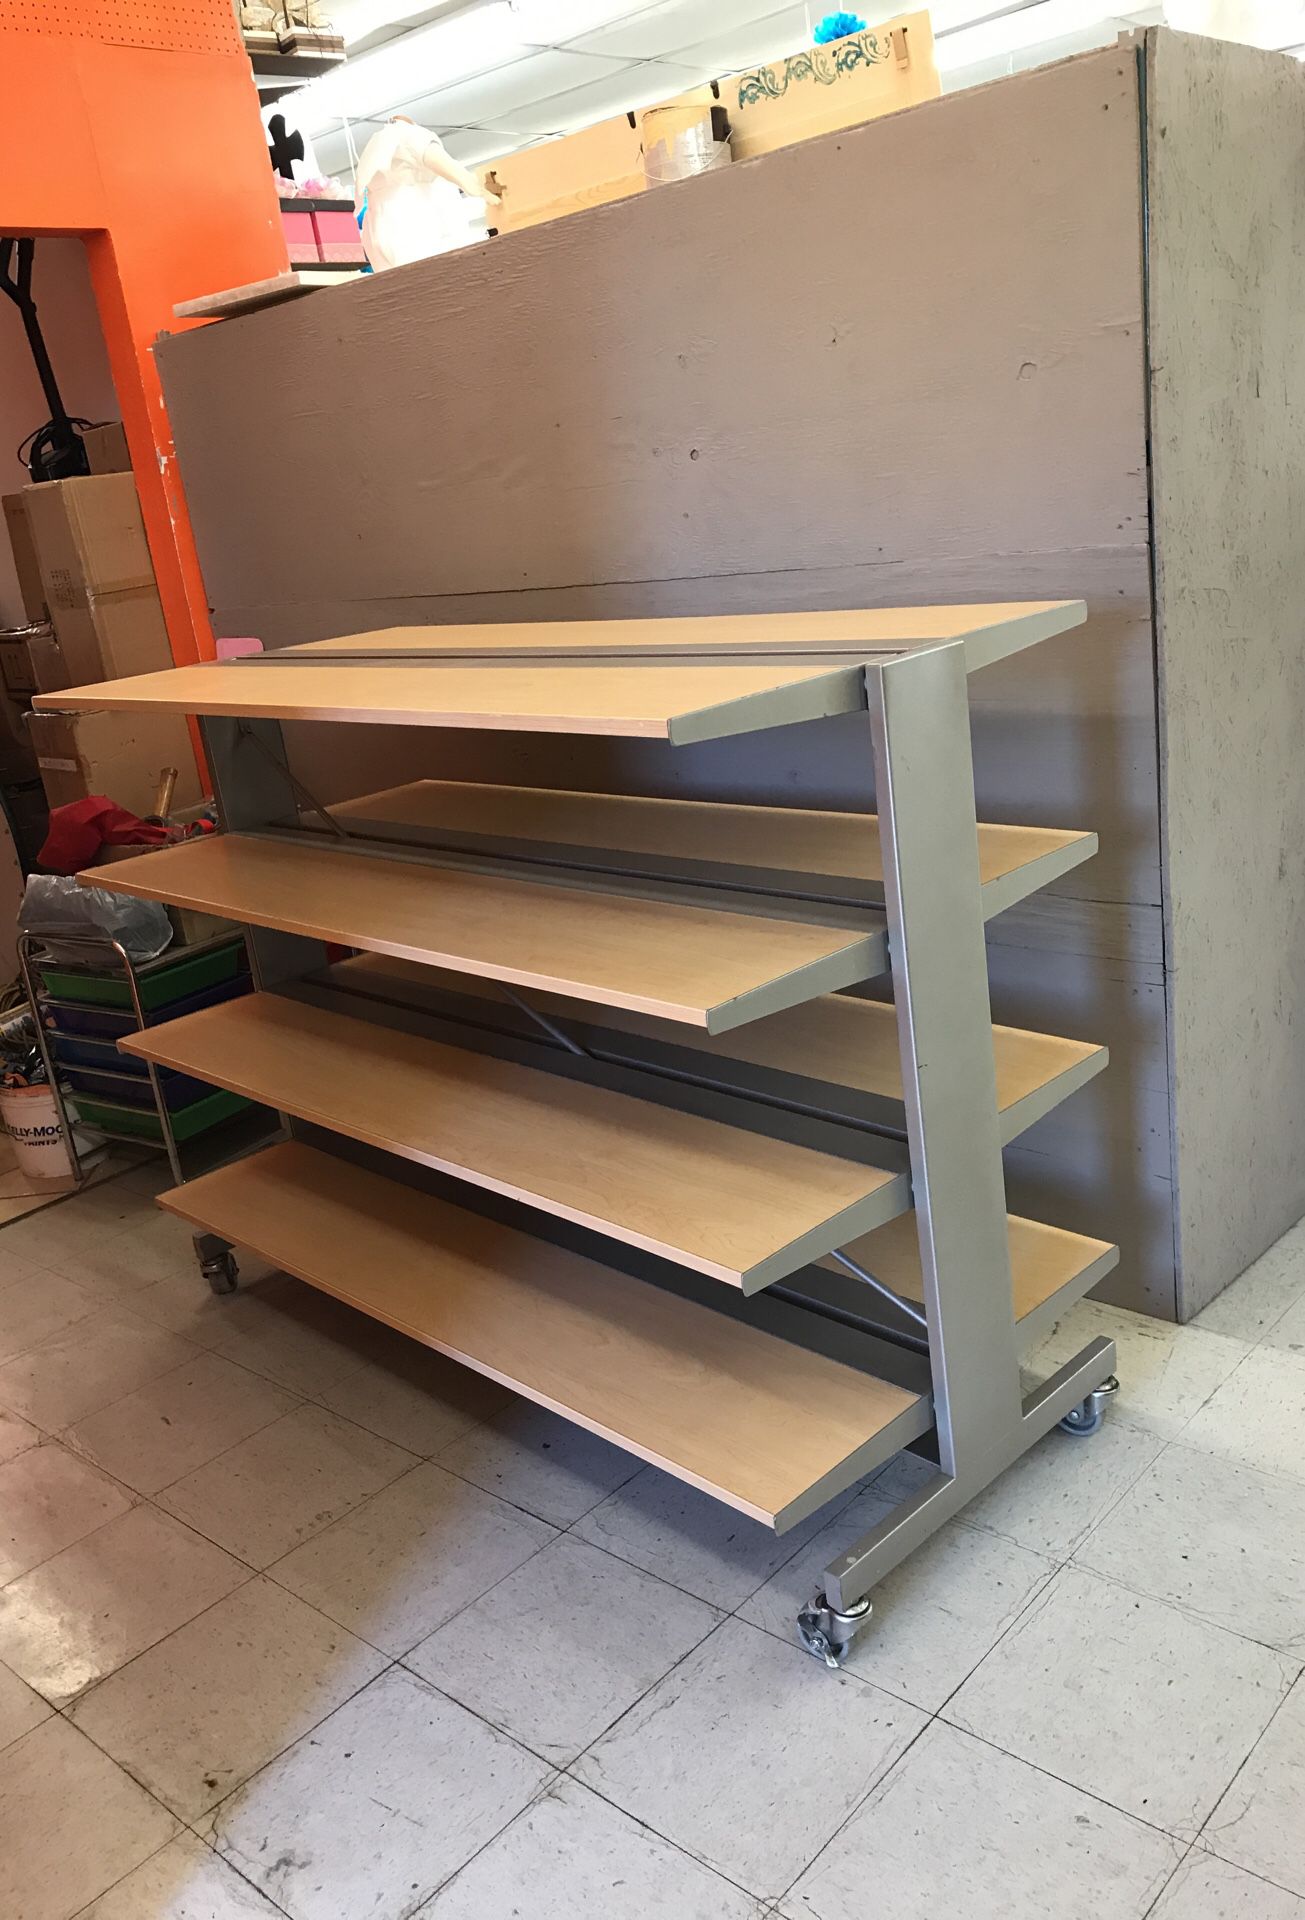 Stainless Steel with wooden shelves